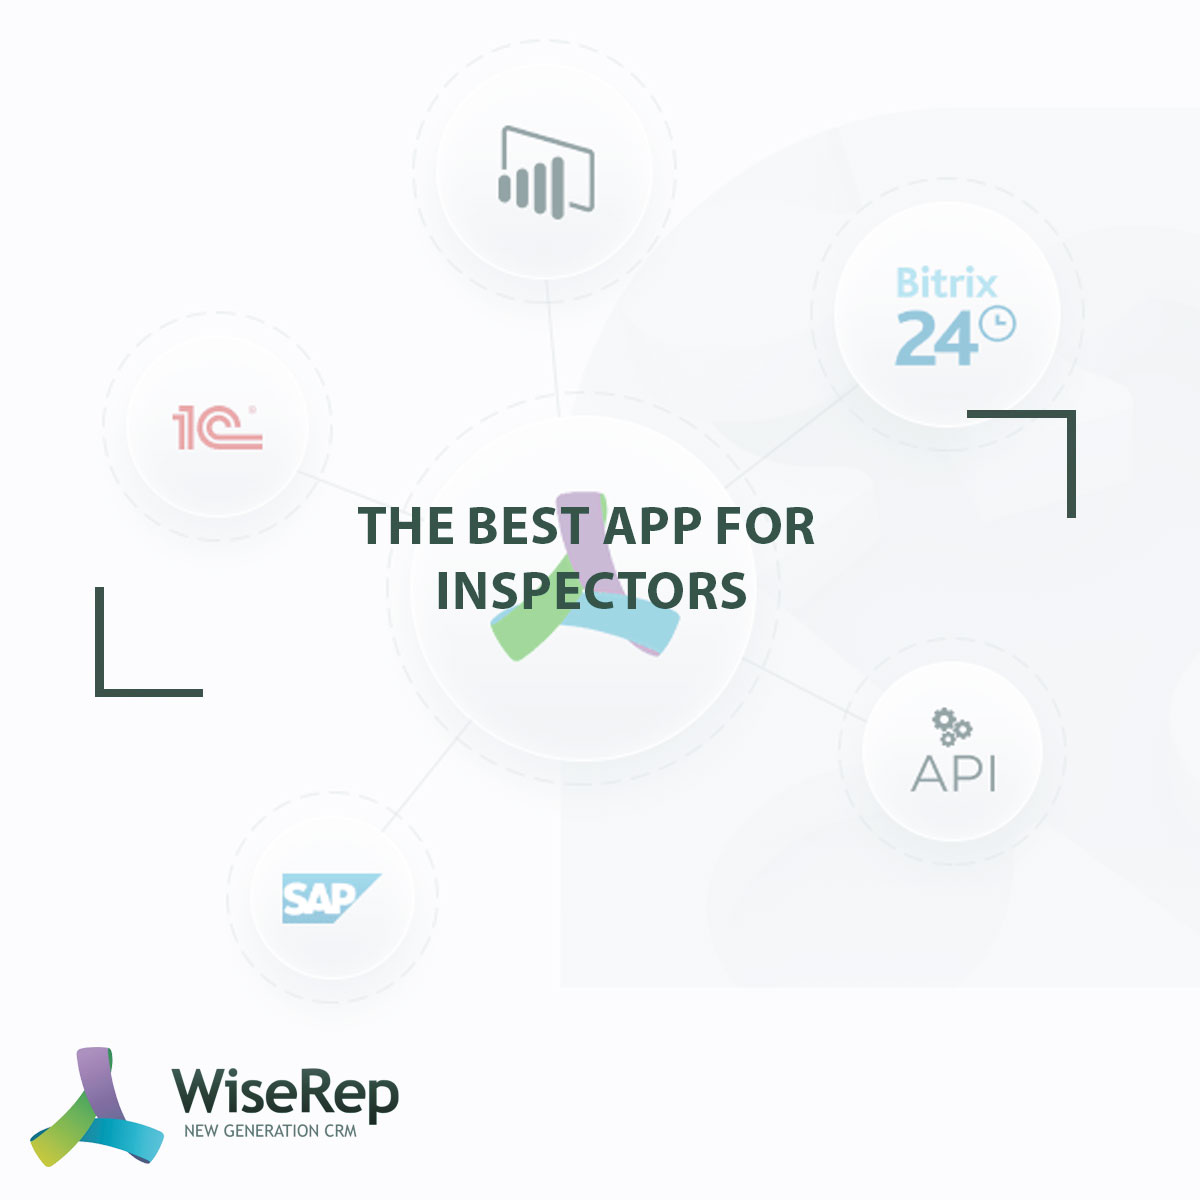 The best app for inspectors